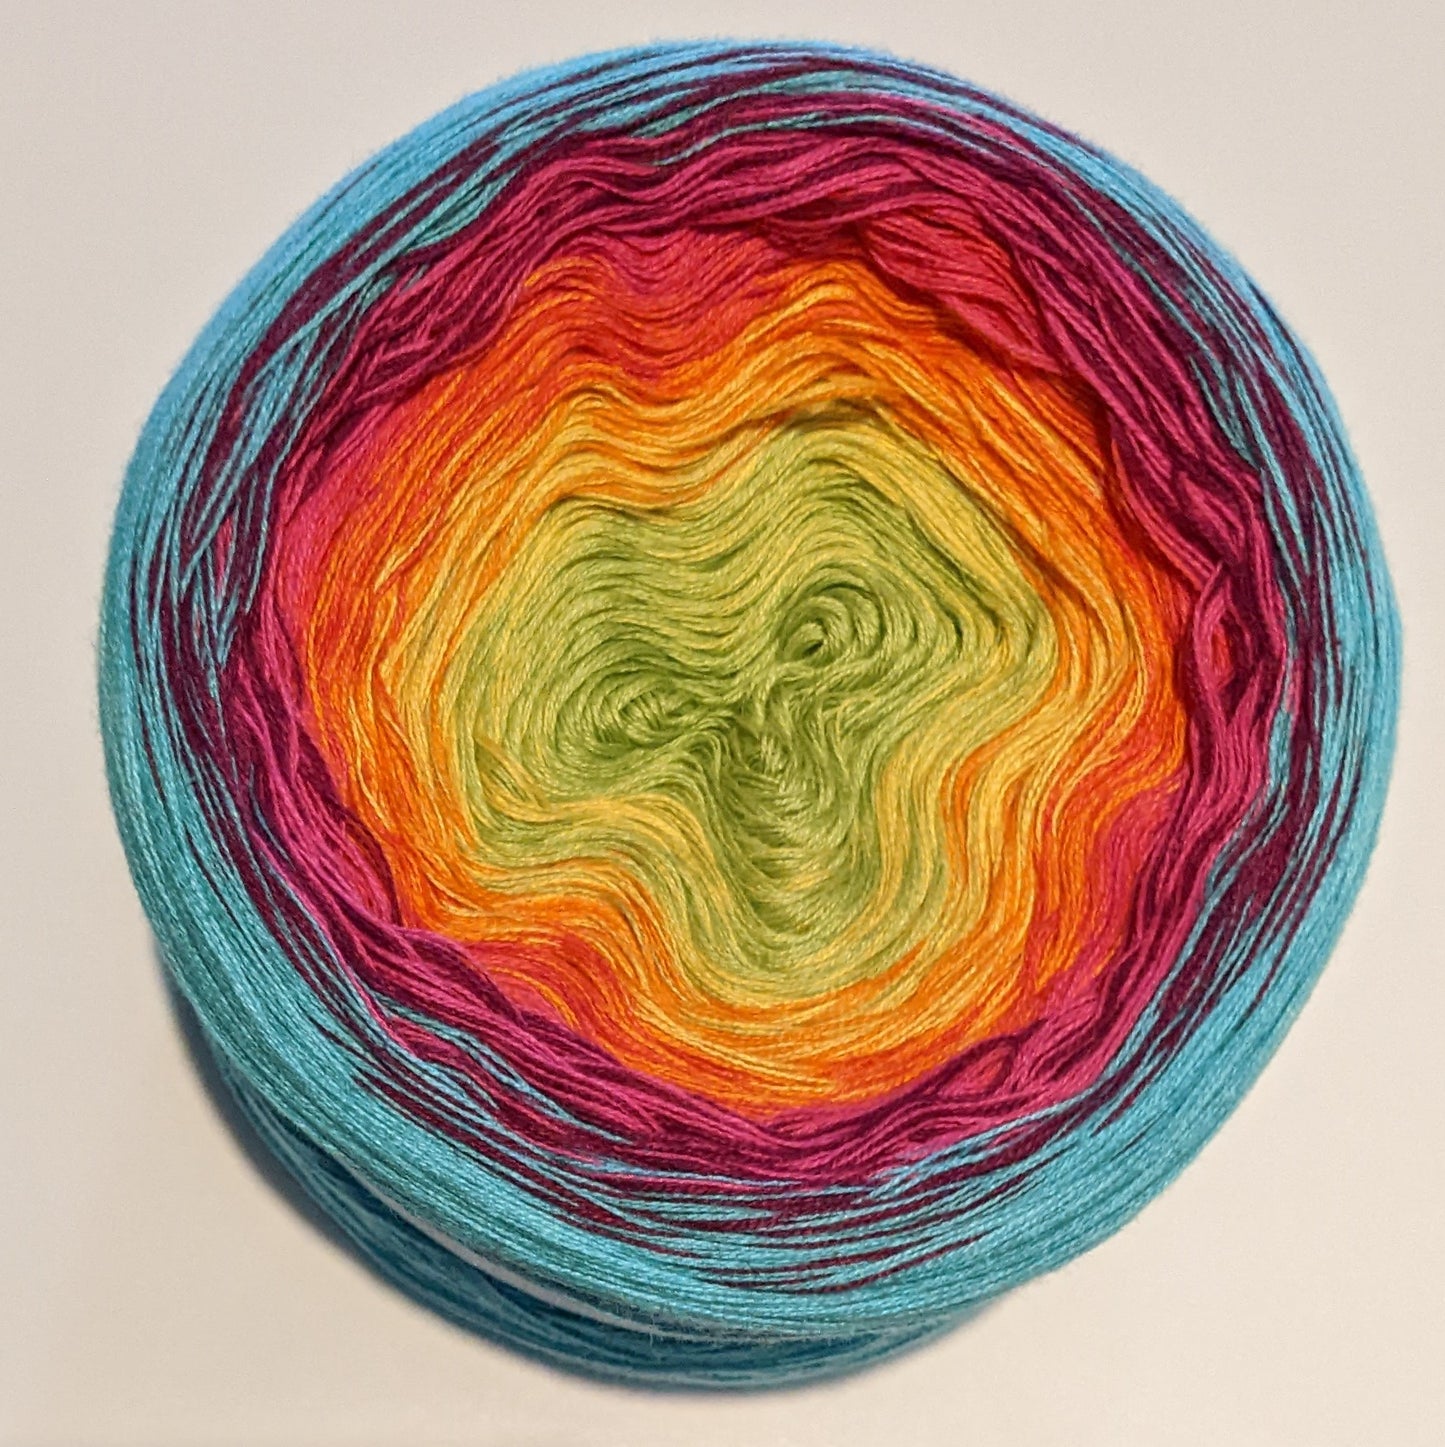 Over the Rainbow (by Biancha) Gradient Yarn - In Stock